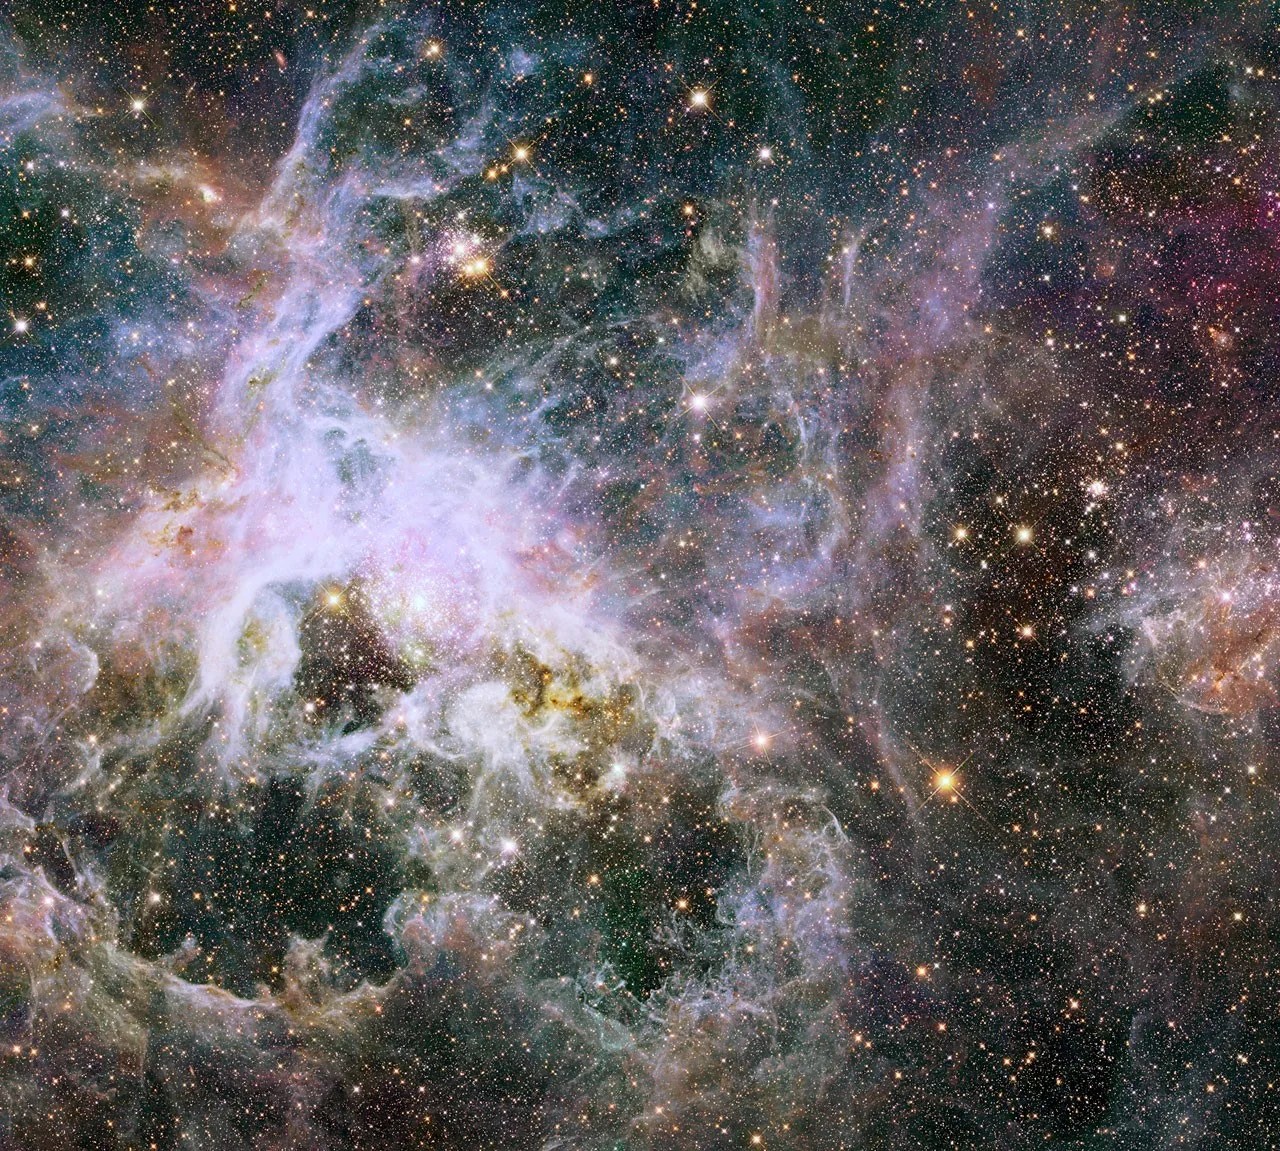 Clouds of pink, white, brown, and grey fill the scene. Bright pinkish-white cloud fills the upper-left quadrant of the image. A few large, yellow stars and many, small white stars dot the scene.